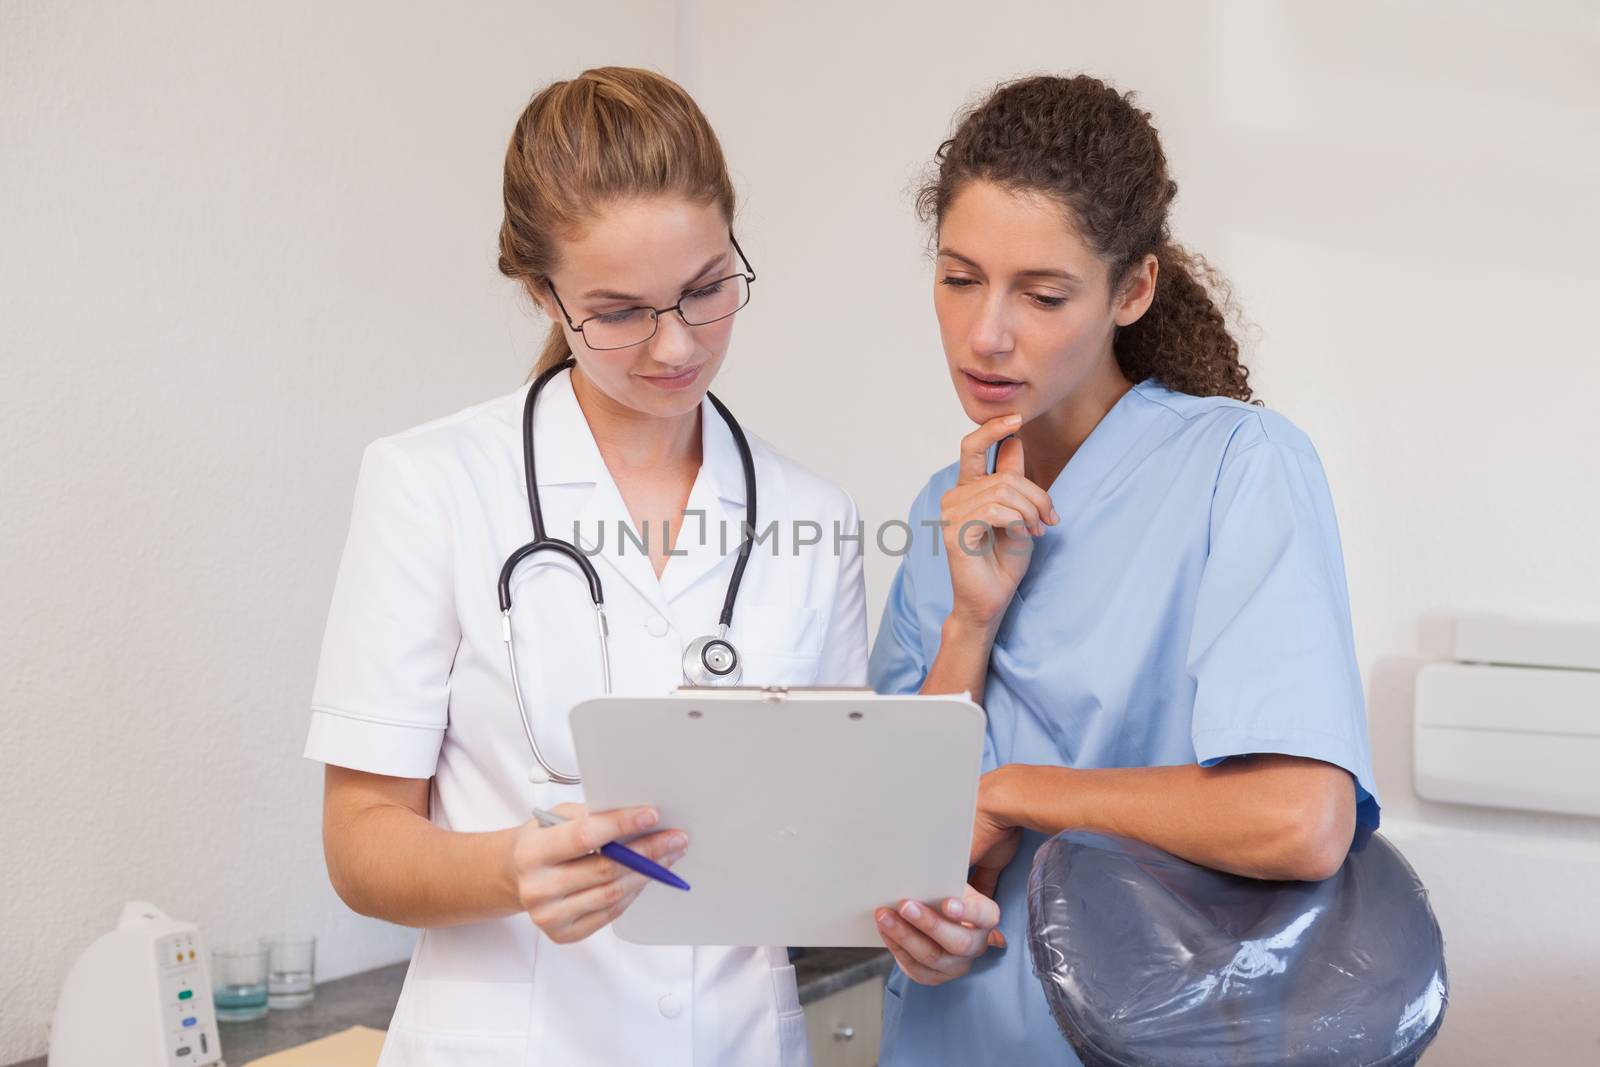 Dentist and dental assistant looking at clipboard by Wavebreakmedia